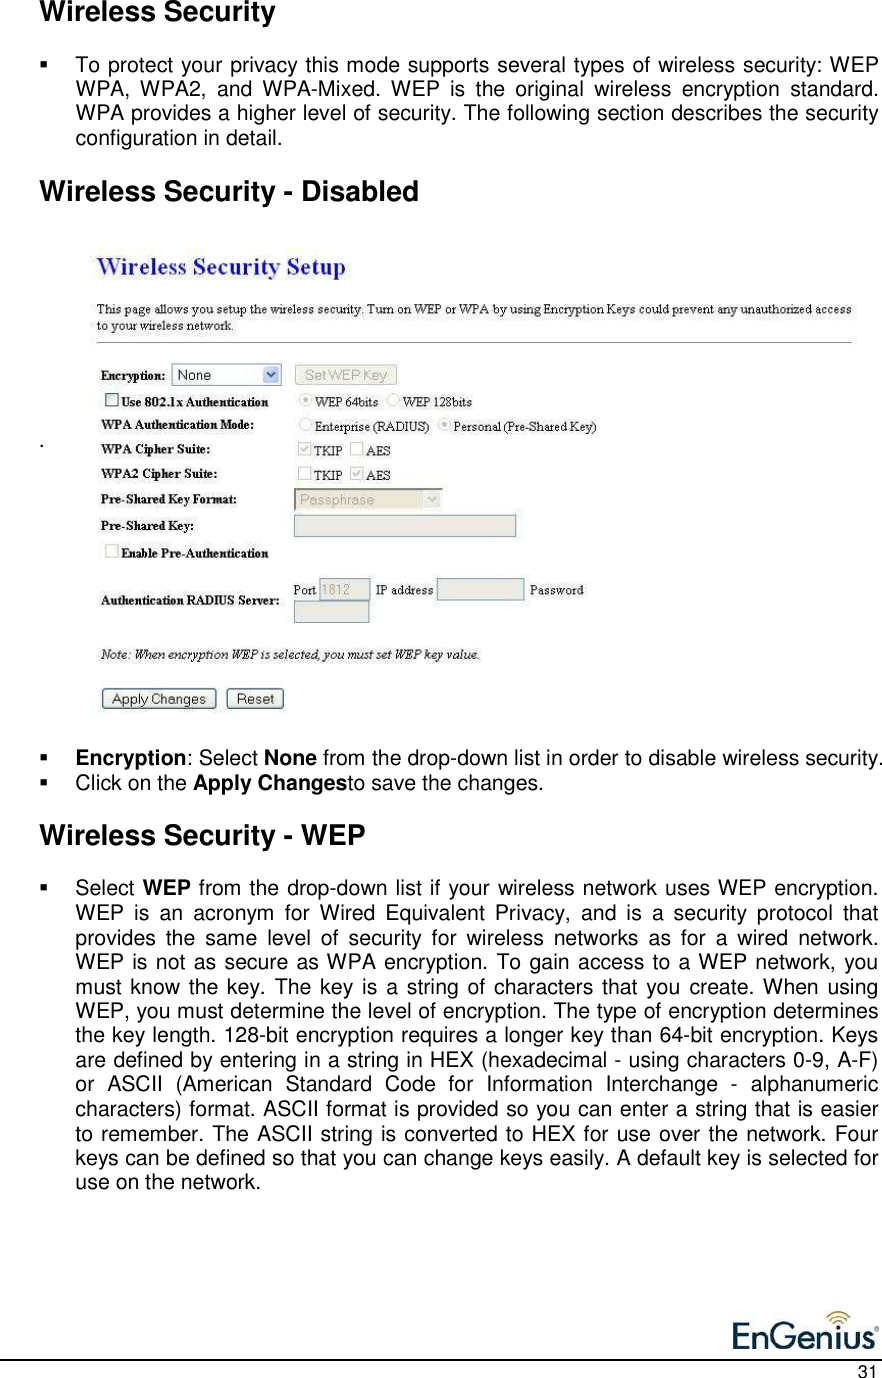    31   Wireless Security    To protect your privacy this mode supports several types of wireless security: WEP WPA,  WPA2,  and  WPA-Mixed.  WEP  is  the  original  wireless  encryption  standard. WPA provides a higher level of security. The following section describes the security configuration in detail.     Wireless Security - Disabled         .               Encryption: Select None from the drop-down list in order to disable wireless security.    Click on the Apply Changesto save the changes.     Wireless Security - WEP   Select WEP from the drop-down list if your wireless network uses WEP encryption. WEP  is  an  acronym  for  Wired  Equivalent  Privacy,  and  is  a  security  protocol  that provides  the  same  level  of  security  for  wireless  networks  as  for  a  wired  network.  WEP is not as secure as WPA encryption. To gain access to a WEP network, you must know the key. The key is a string of characters that you  create. When using WEP, you must determine the level of encryption. The type of encryption determines the key length. 128-bit encryption requires a longer key than 64-bit encryption. Keys are defined by entering in a string in HEX (hexadecimal - using characters 0-9, A-F) or  ASCII  (American  Standard  Code  for  Information  Interchange  -  alphanumeric characters) format. ASCII format is provided so you can enter a string that is easier to remember. The ASCII string is converted to HEX for use over the network. Four keys can be defined so that you can change keys easily. A default key is selected for use on the network.      